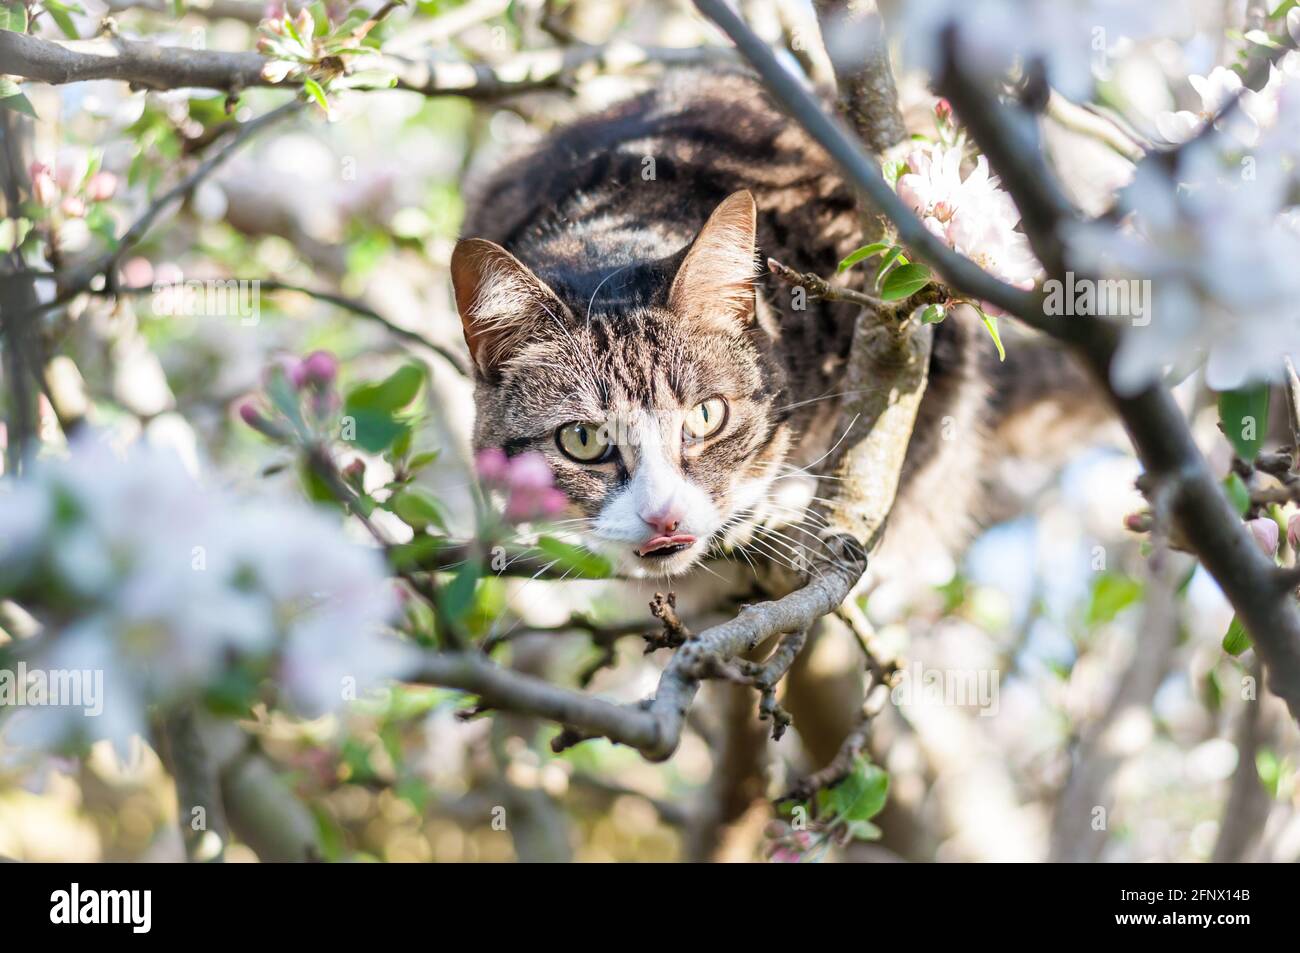 A female short-haired tabby cat (Felis catus) sitting on a blossoming apple tree (Malus domestica) with her tongue out Stock Photo